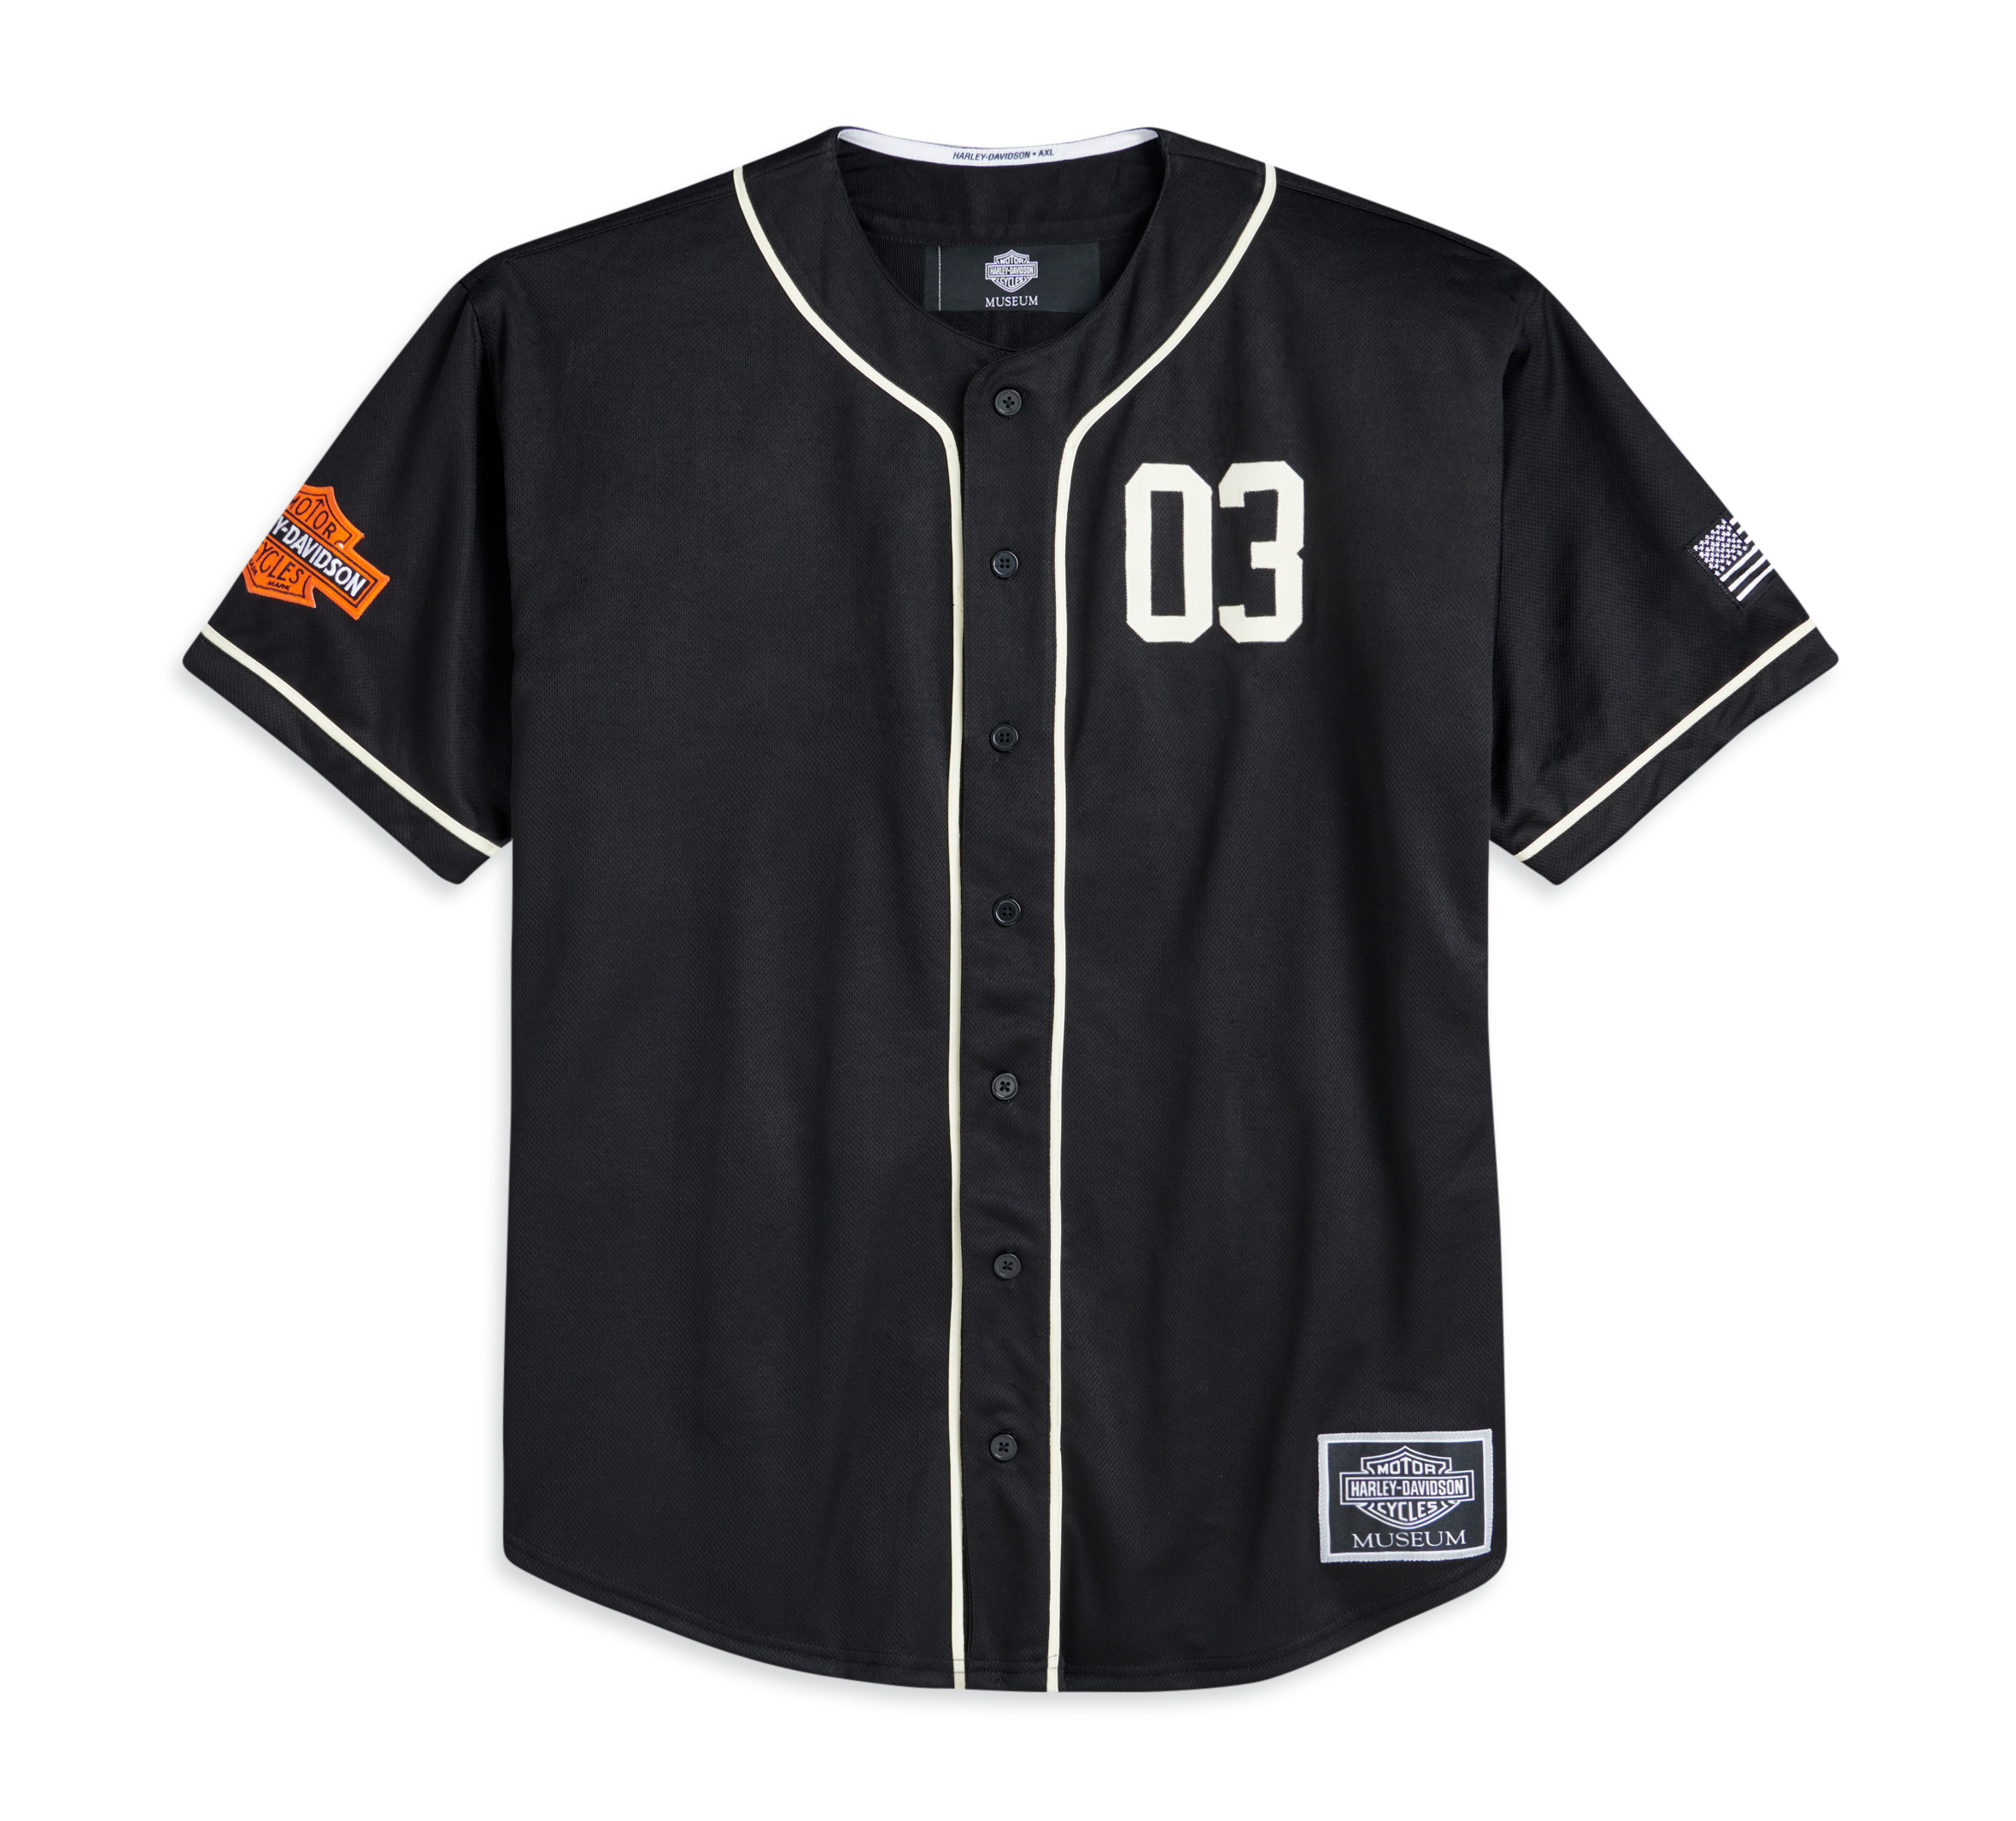  Custom Baseball Jersey Add Your Name and Number, Customized  Personalized Baseball Shirt for Men Women and Boy Gray : Clothing, Shoes &  Jewelry